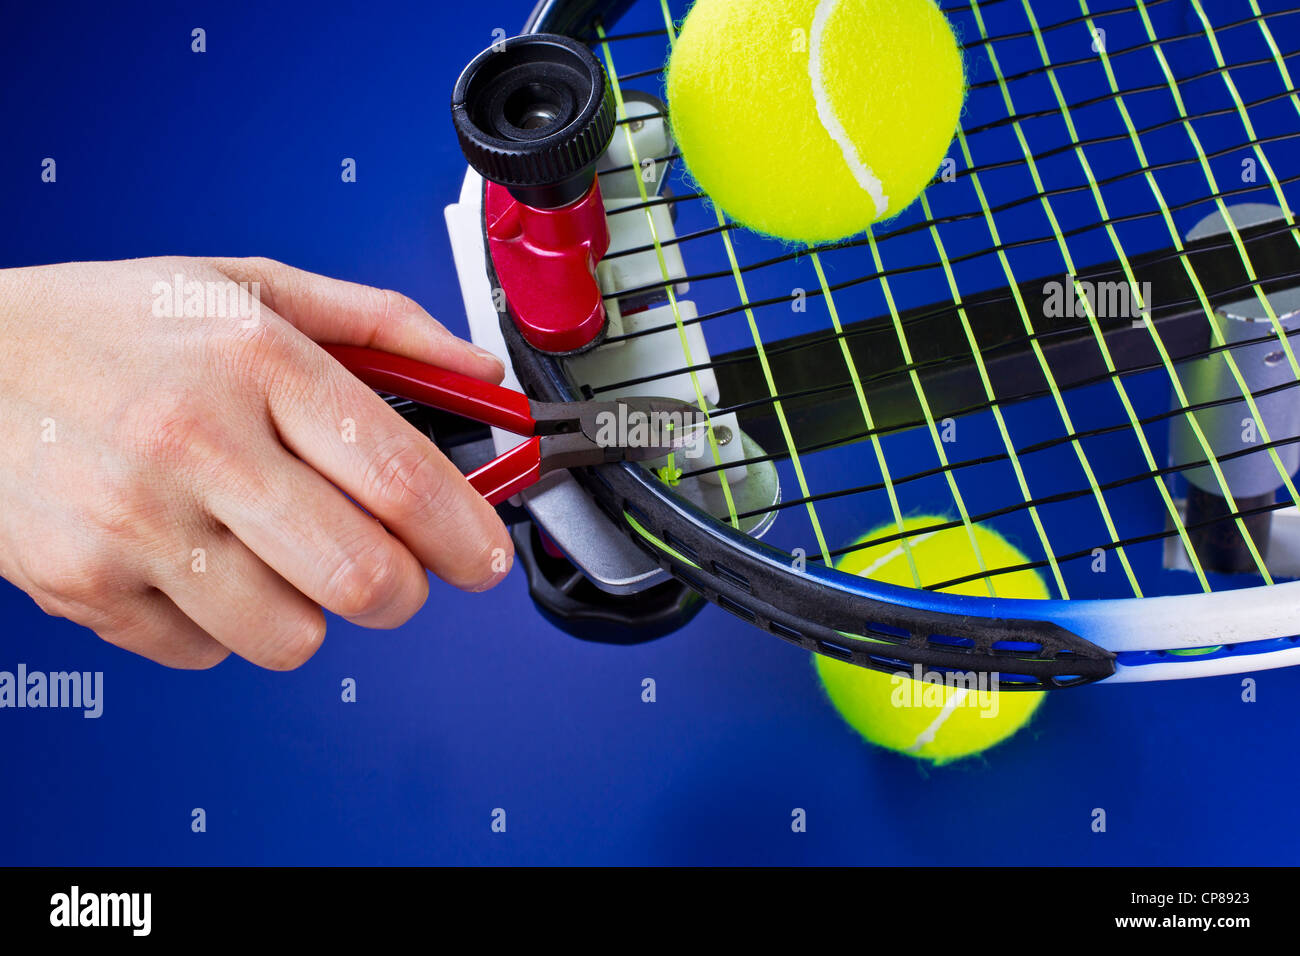 Hand holding pliers while trimming string on tennis racket on blue background Stock Photo